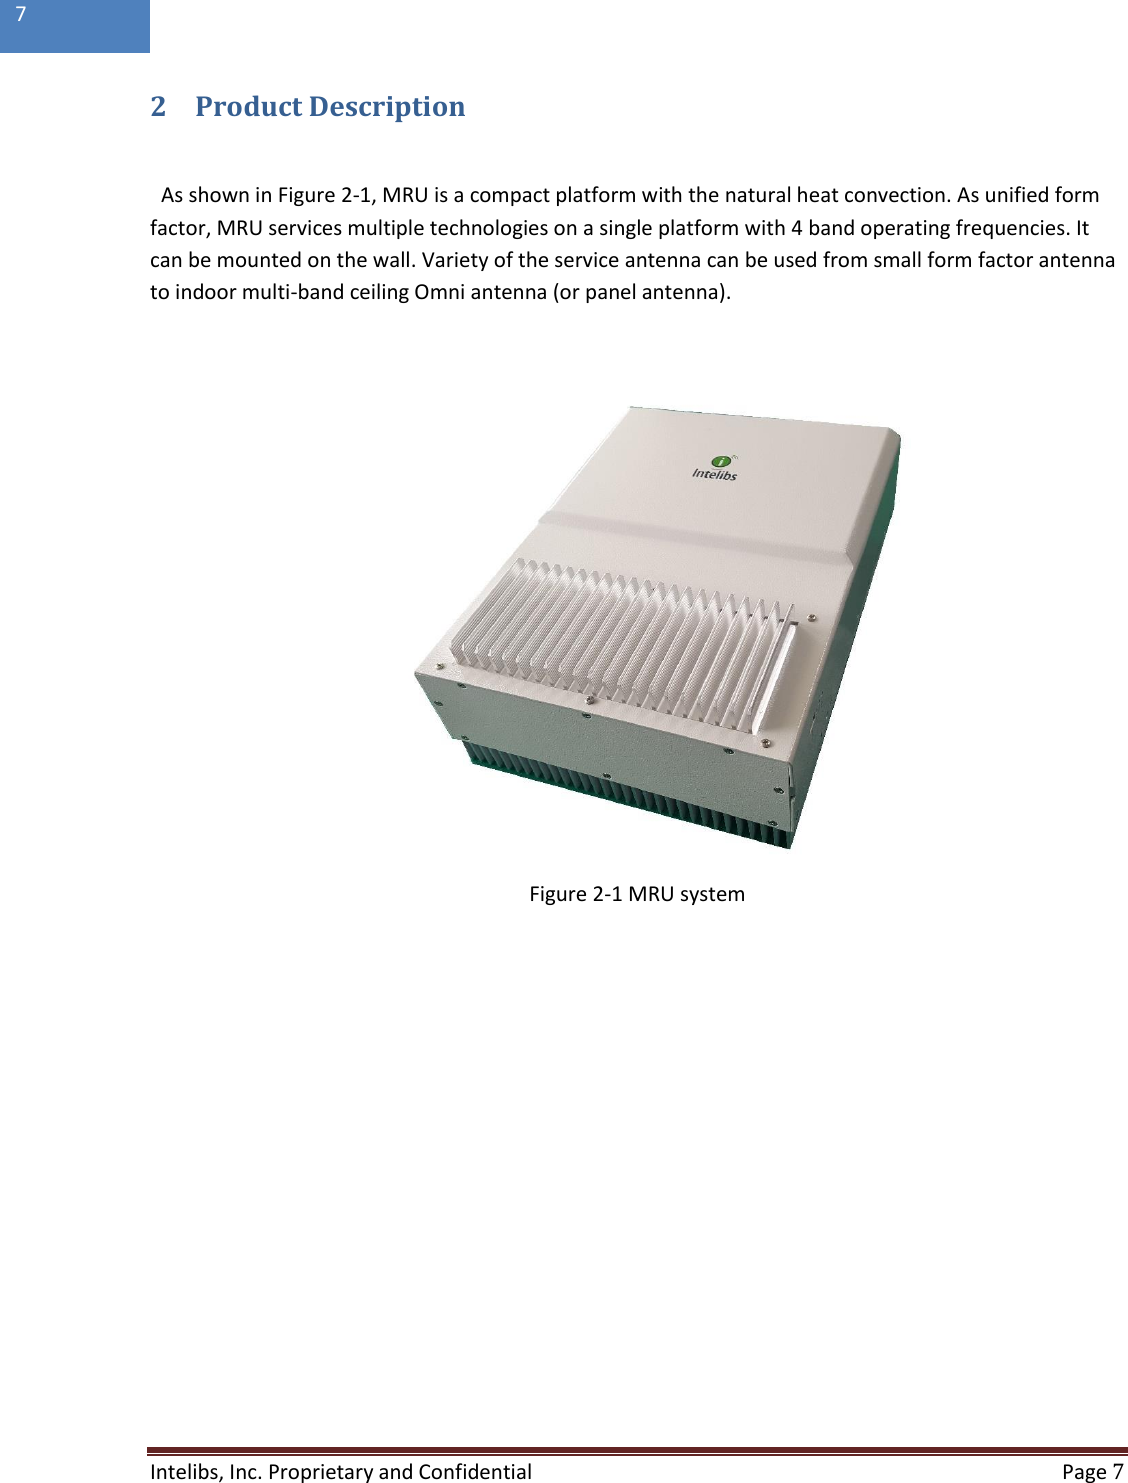  Intelibs, Inc. Proprietary and Confidential   Page 7  7  2 Product Description  As shown in Figure 2-1, MRU is a compact platform with the natural heat convection. As unified form factor, MRU services multiple technologies on a single platform with 4 band operating frequencies. It can be mounted on the wall. Variety of the service antenna can be used from small form factor antenna to indoor multi-band ceiling Omni antenna (or panel antenna).                  Figure 2-1 MRU system    